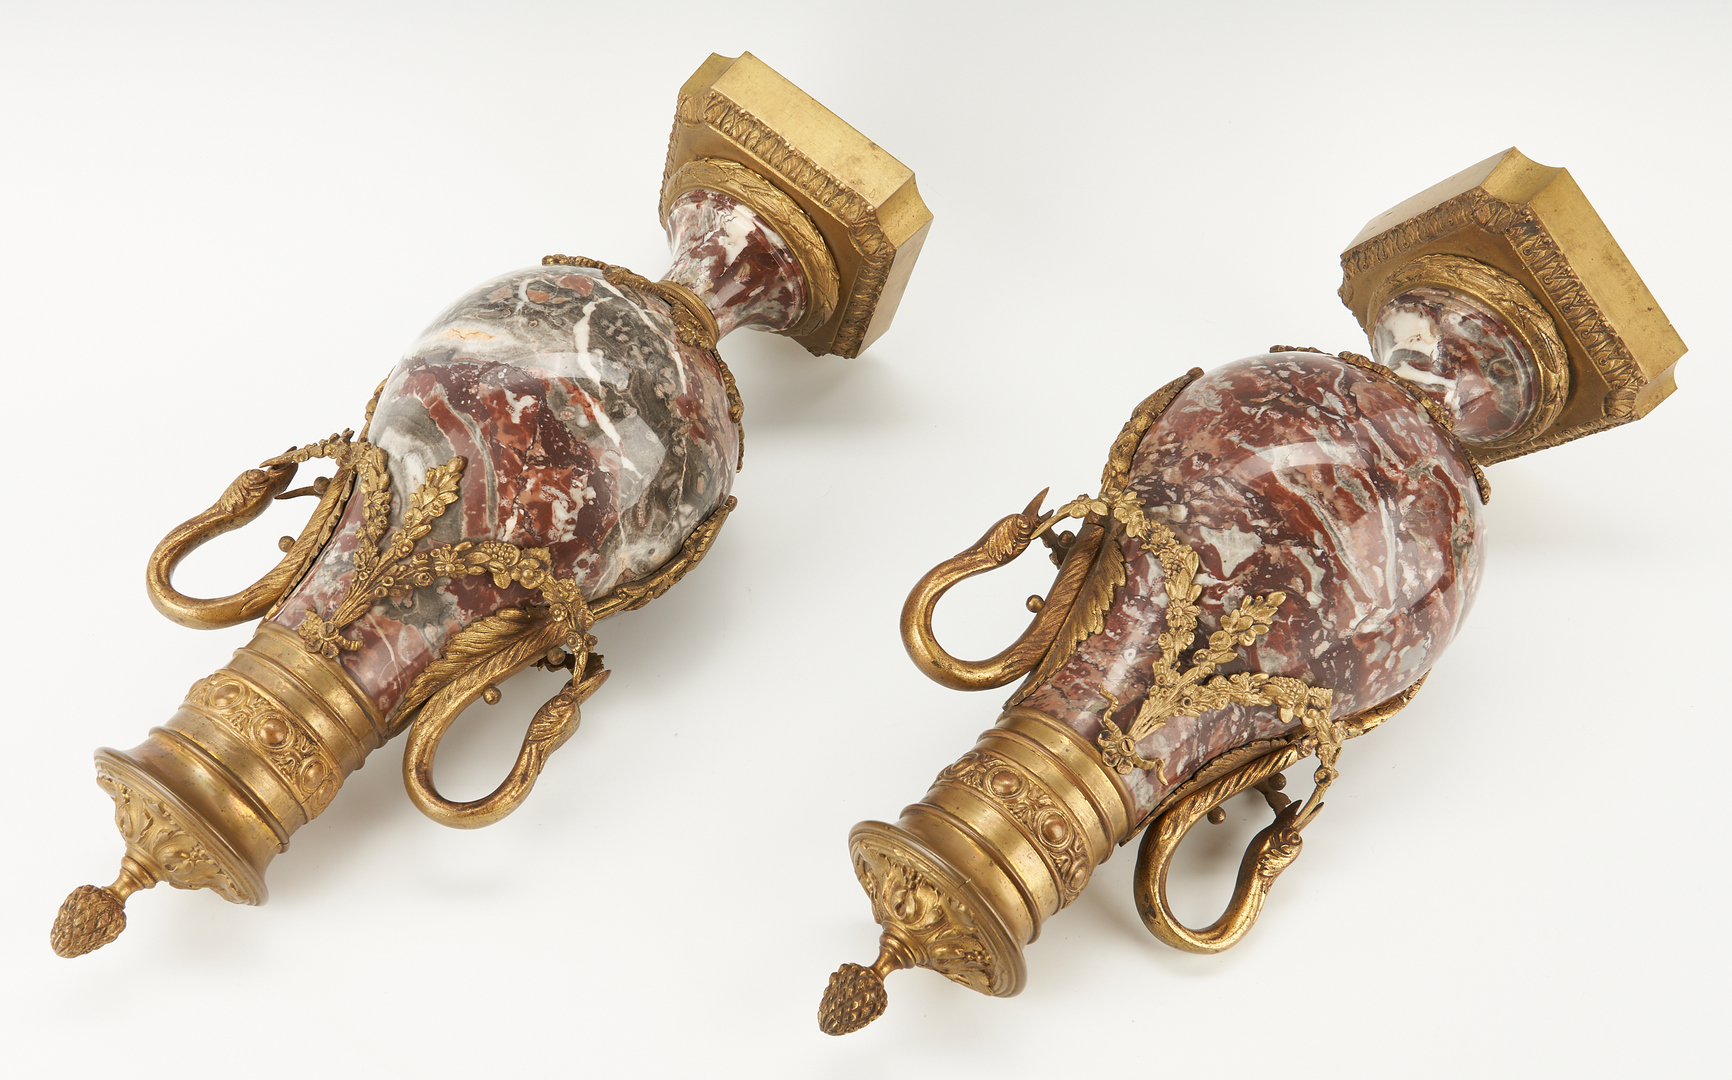 Lot 133: Pair Louis XVI Style Rouge Marble and Ormolu Cassolettes or Urns